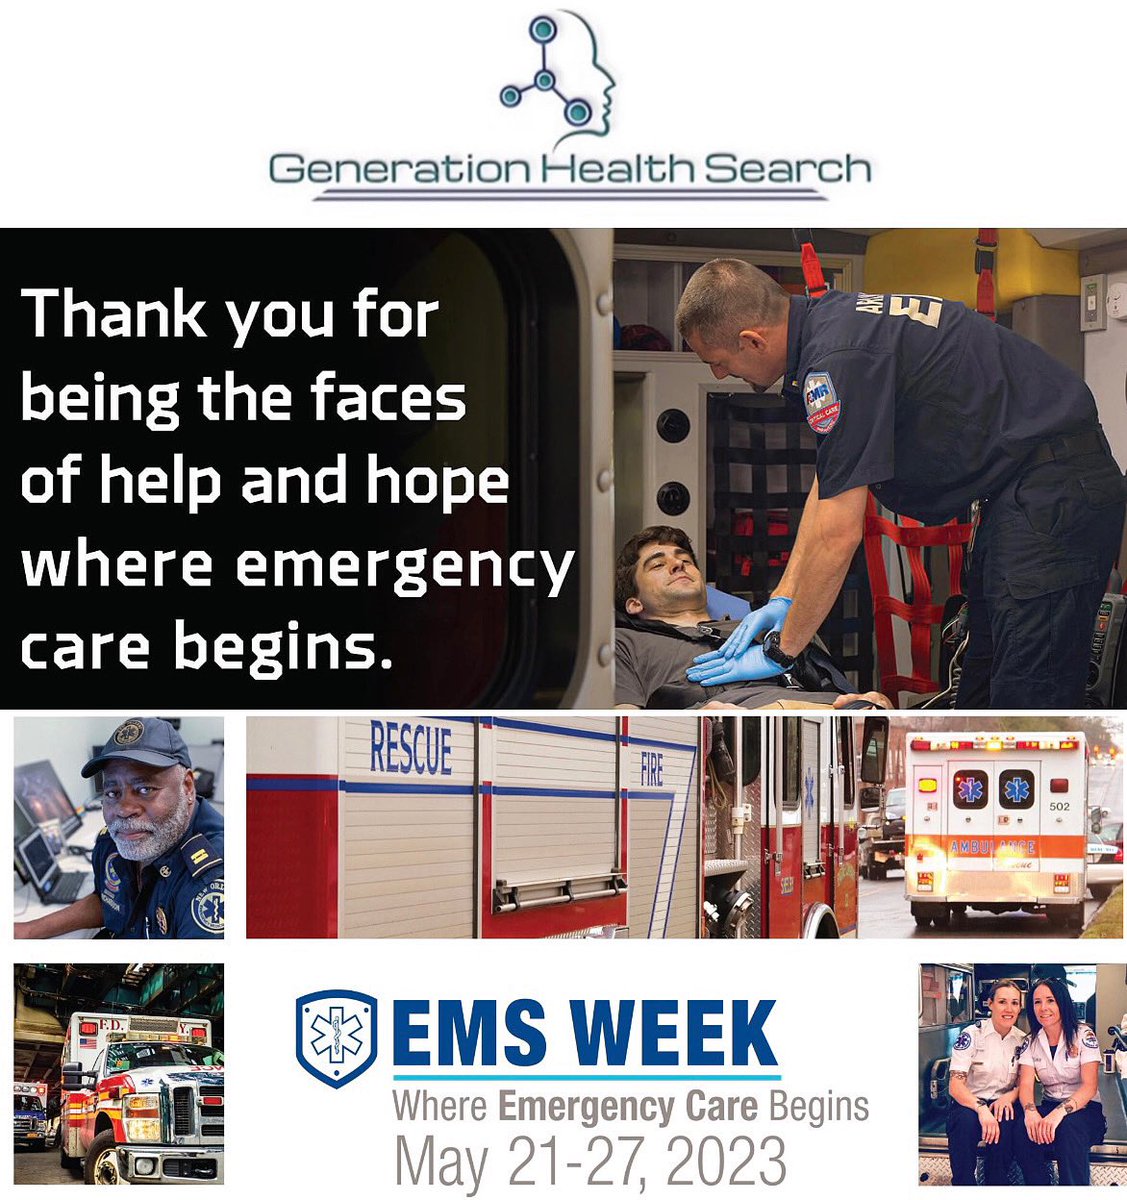 Happy EMS Week 2023.

#Generationhealthsearch
#healthcare #healthcareworkers #healthcarejobs #healthcareprofessional #physician #psychiatry #doctors #physicianrecruitment #NY #CT #PA #LCSW #GeneralSurgeons #Psychiatrists #natuonalEMSweek #EMSweek #emtlife